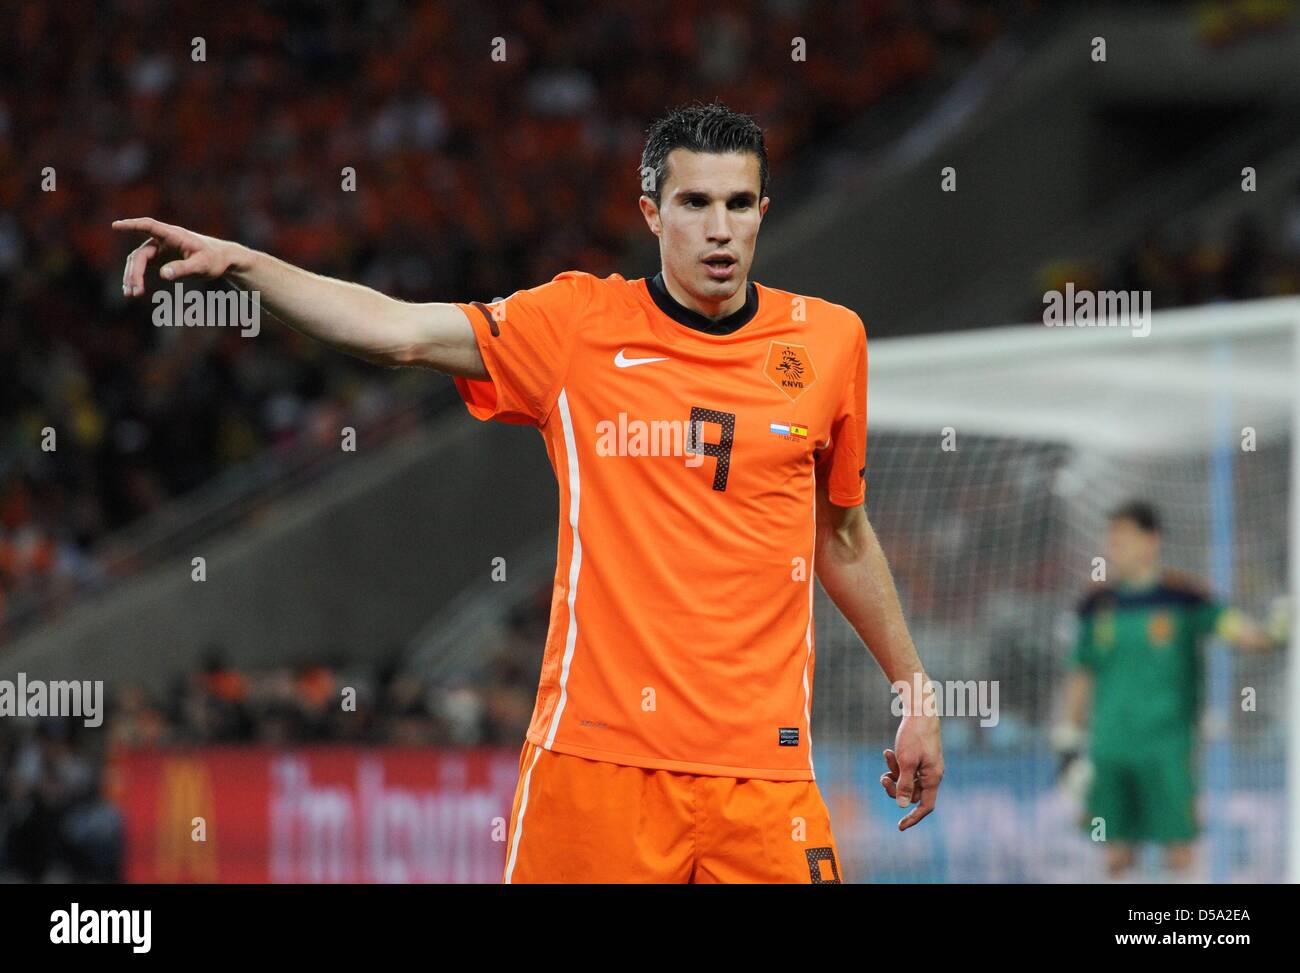 Dutch Robin van Persie gestures during the 2010 FIFA World Cup final match between the Netherlands and Spain at Soccer City Stadium in Johannesburg, South Africa 11 July 2010. Photo: Marcus Brandt dpa - Please refer to http://dpaq.de/FIFA-WM2010-TC  +++(c) dpa - Bildfunk+++ Stock Photo